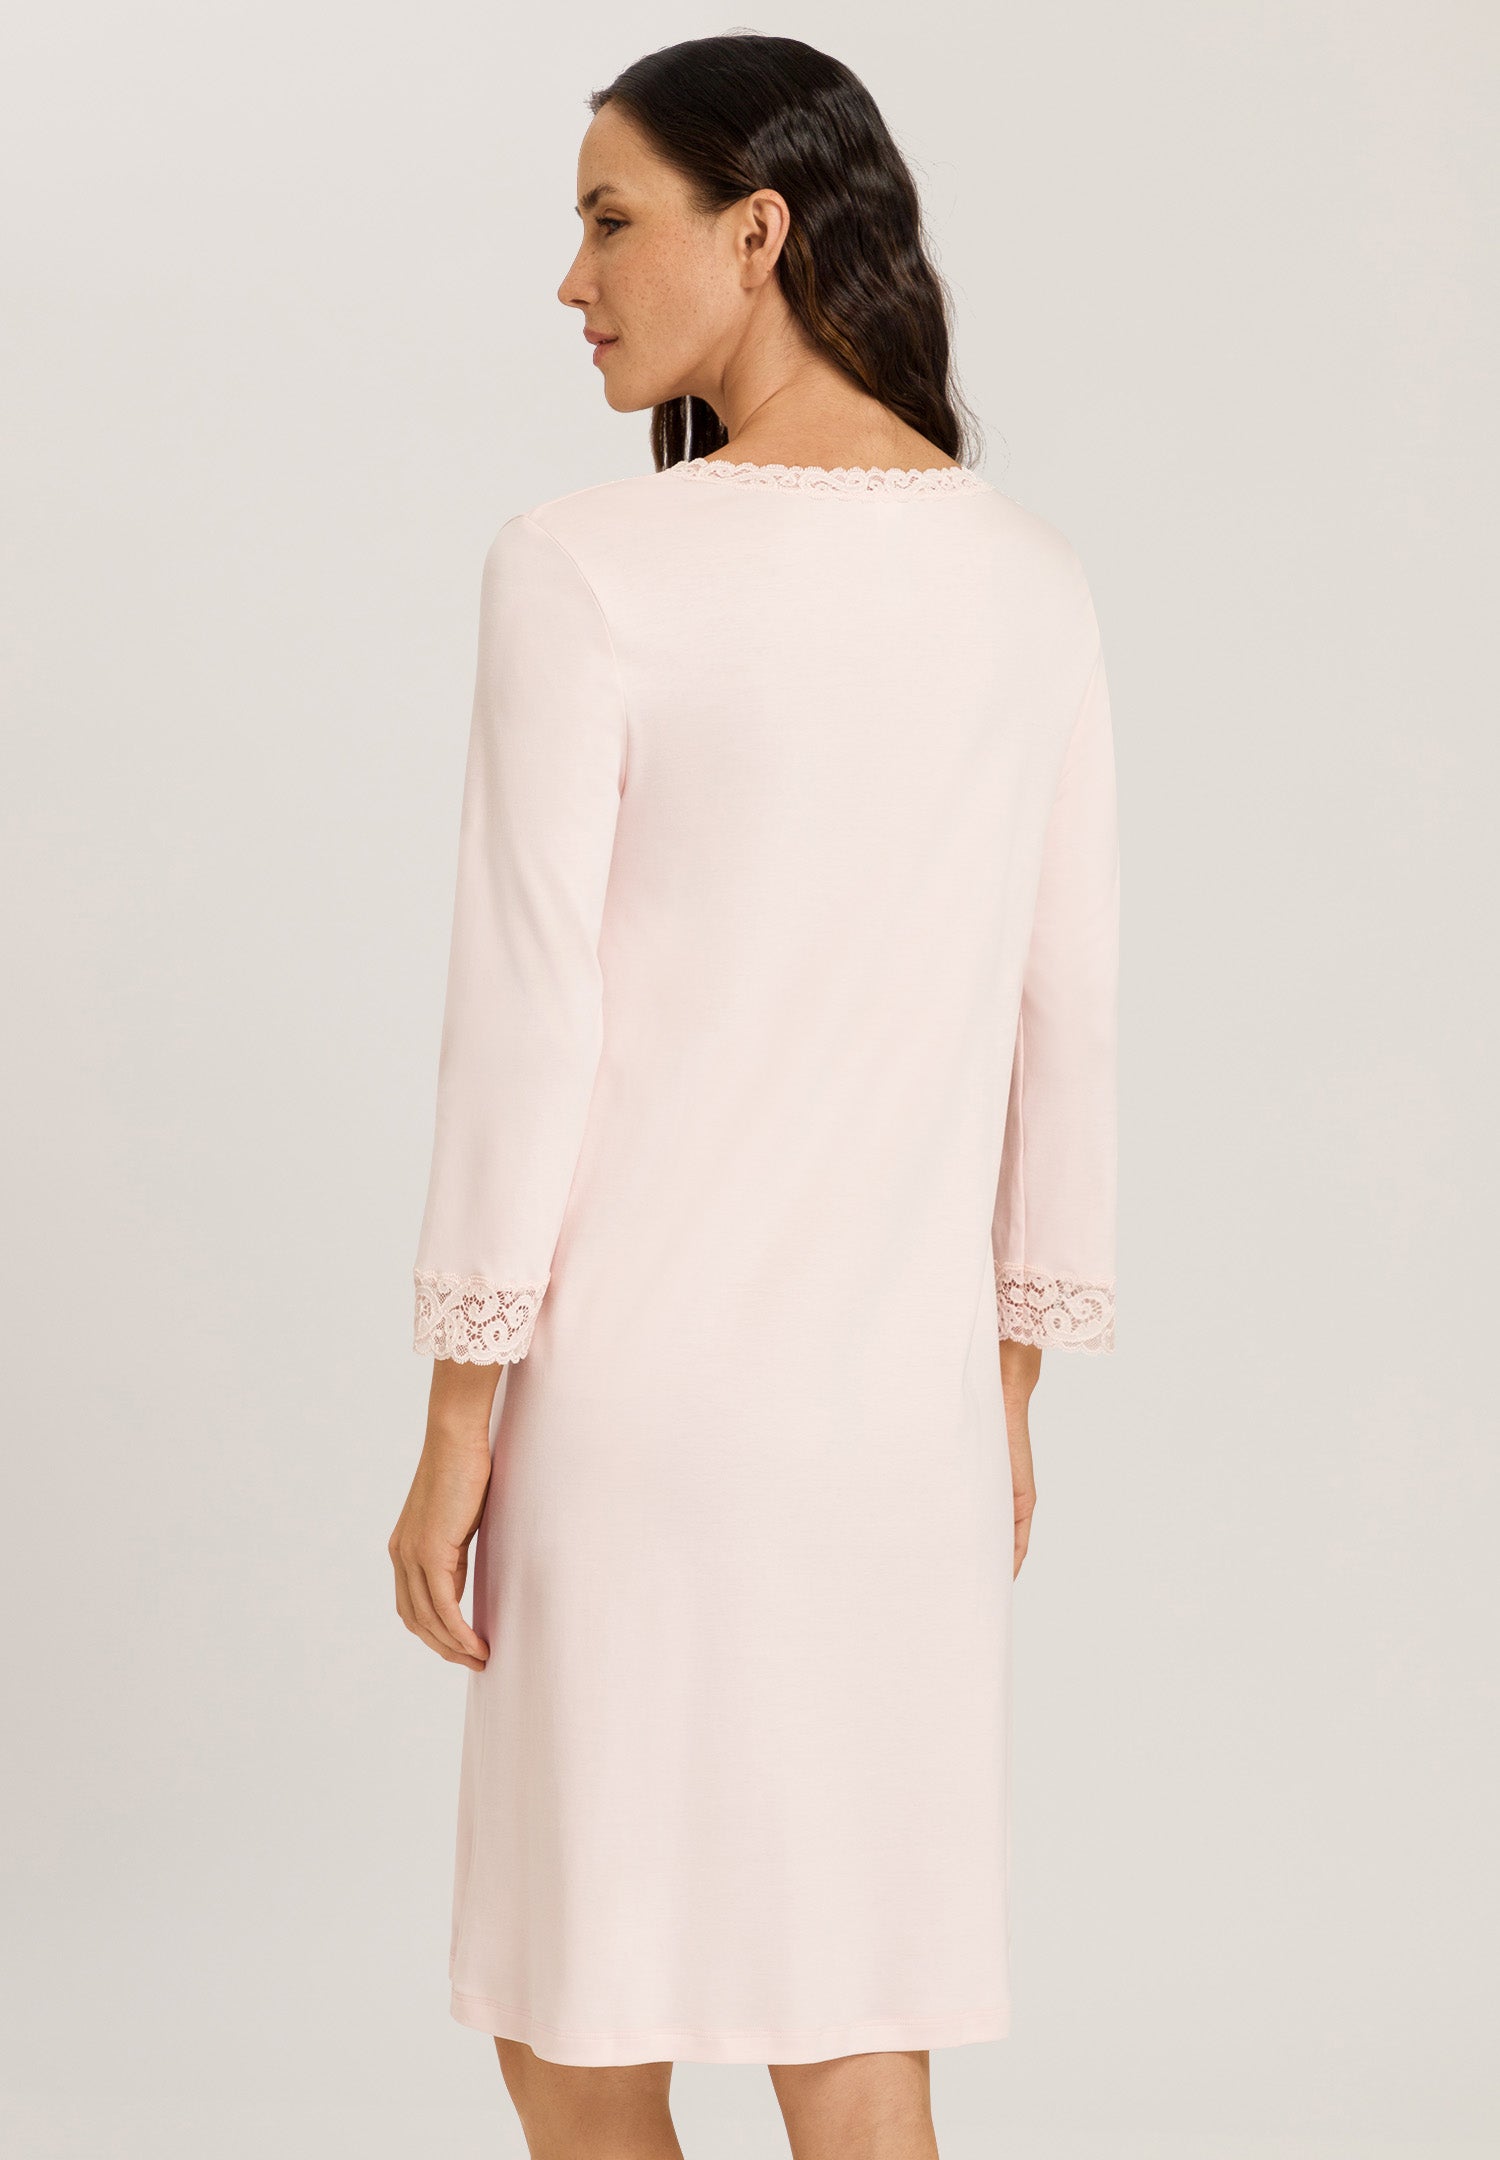 Moments 3/4 Sleeve Nightdress - Crystal Pink